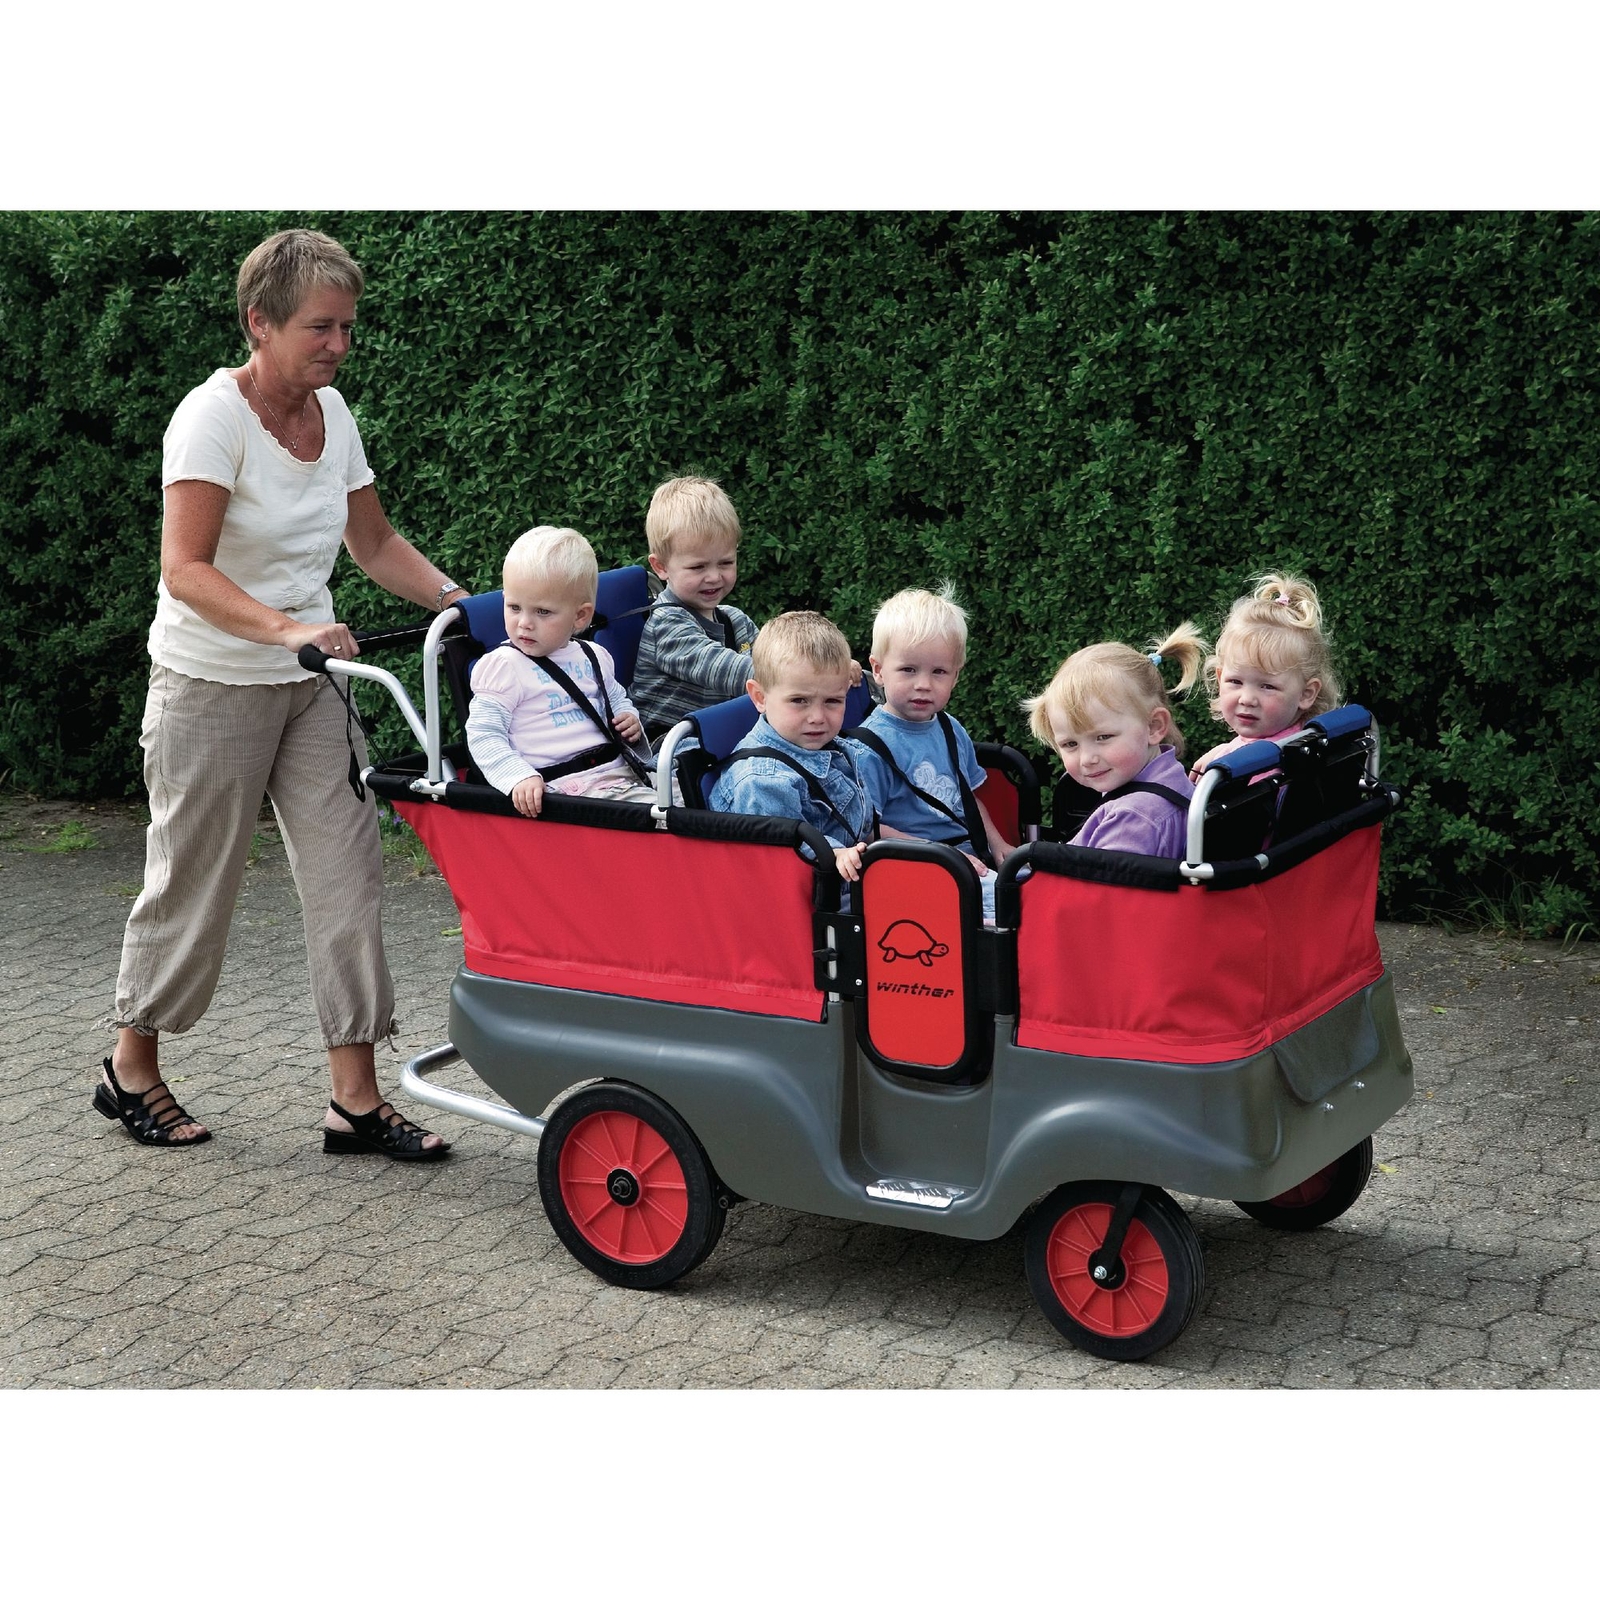 Winther Turtle Kiddy Bus - 6 Seater - W1750 x D750 x H1050mm - Each